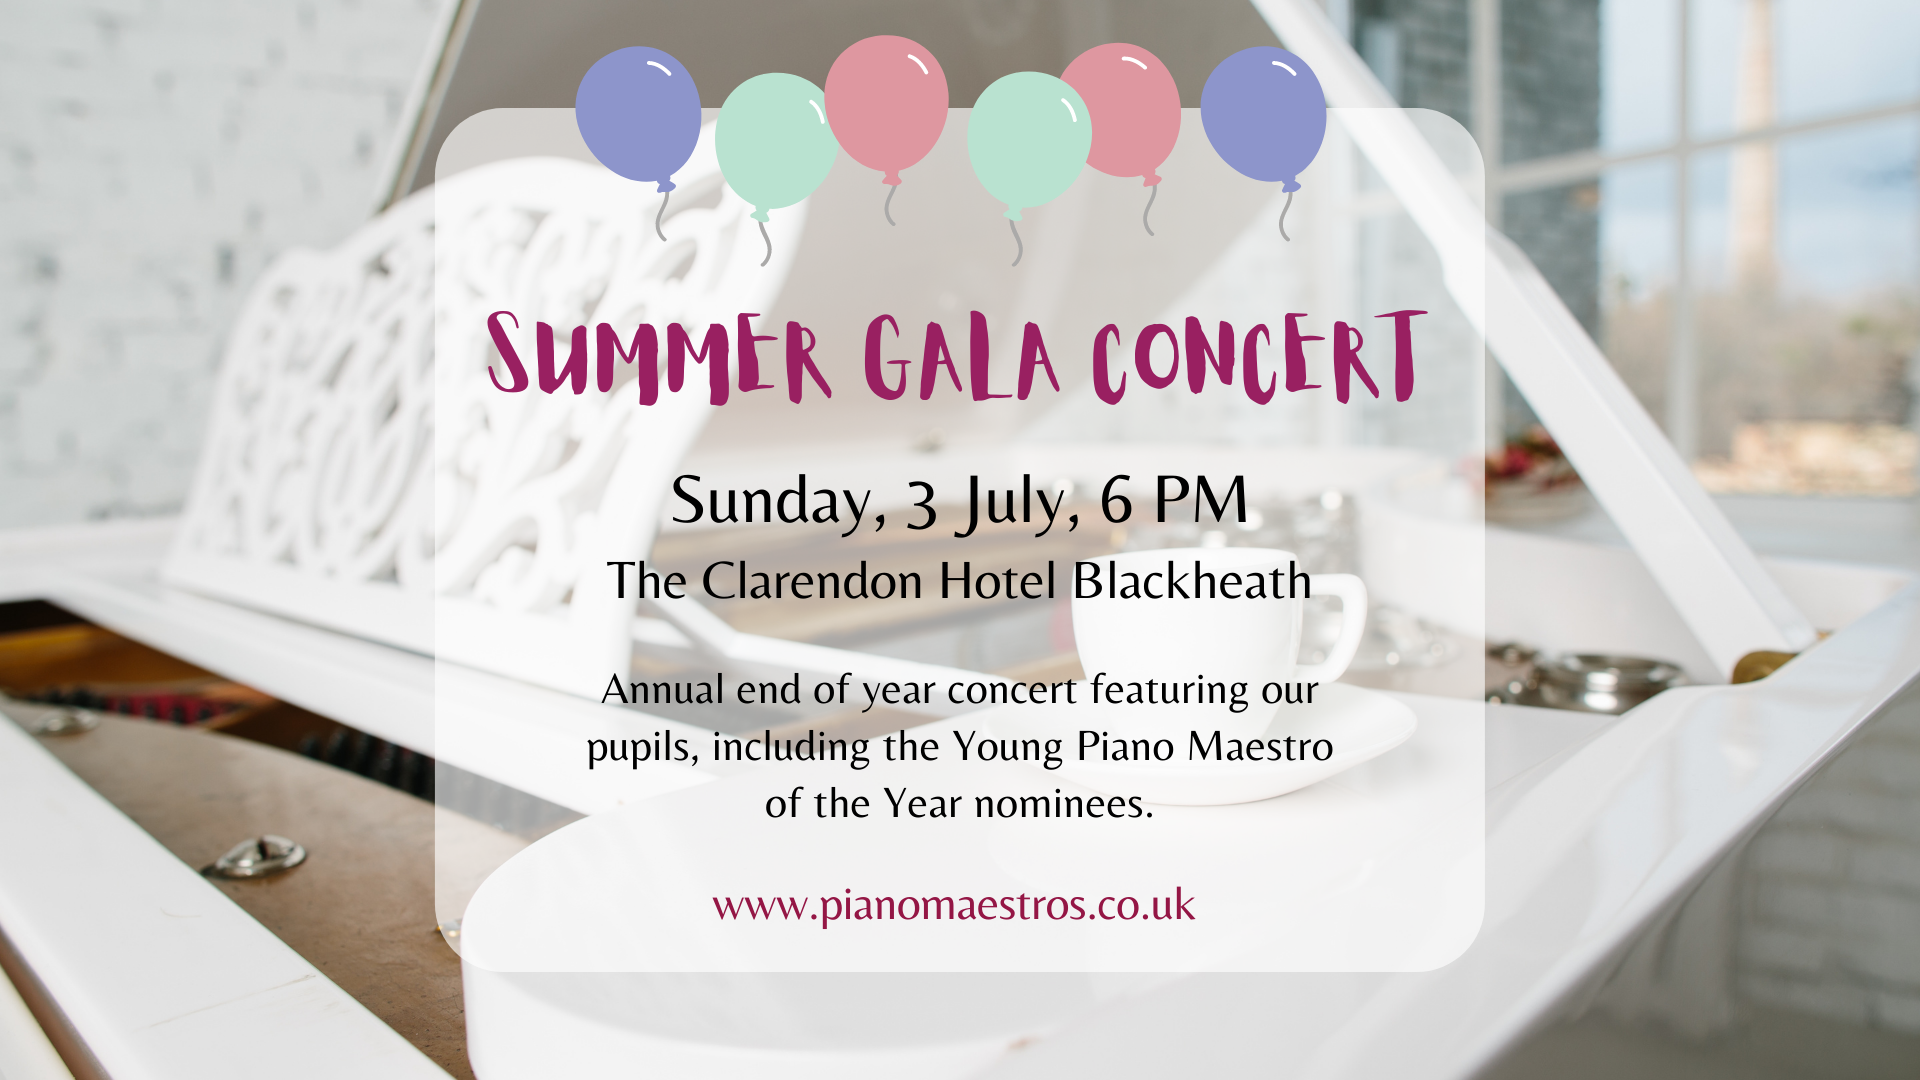 Summer concert is one of the main highlights of the year for our students and their families. Book your tickets early to avoid disappointment.